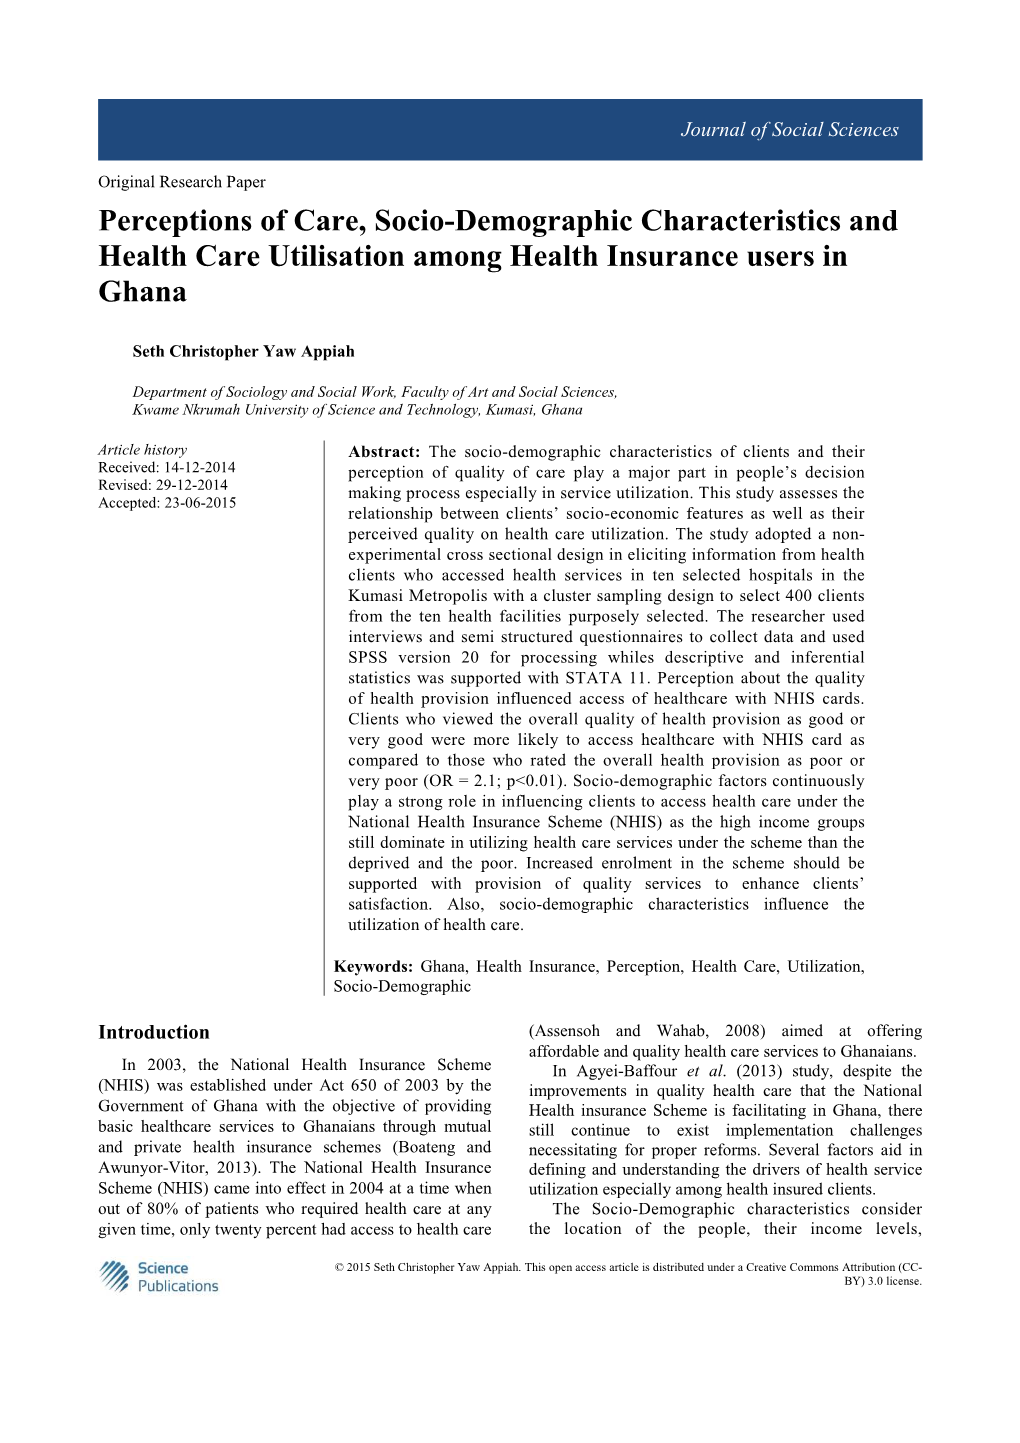 Perceptions of Care, Socio-Demographic Characteristics and Health Care Utilisation Among Health Insurance Users in Ghana